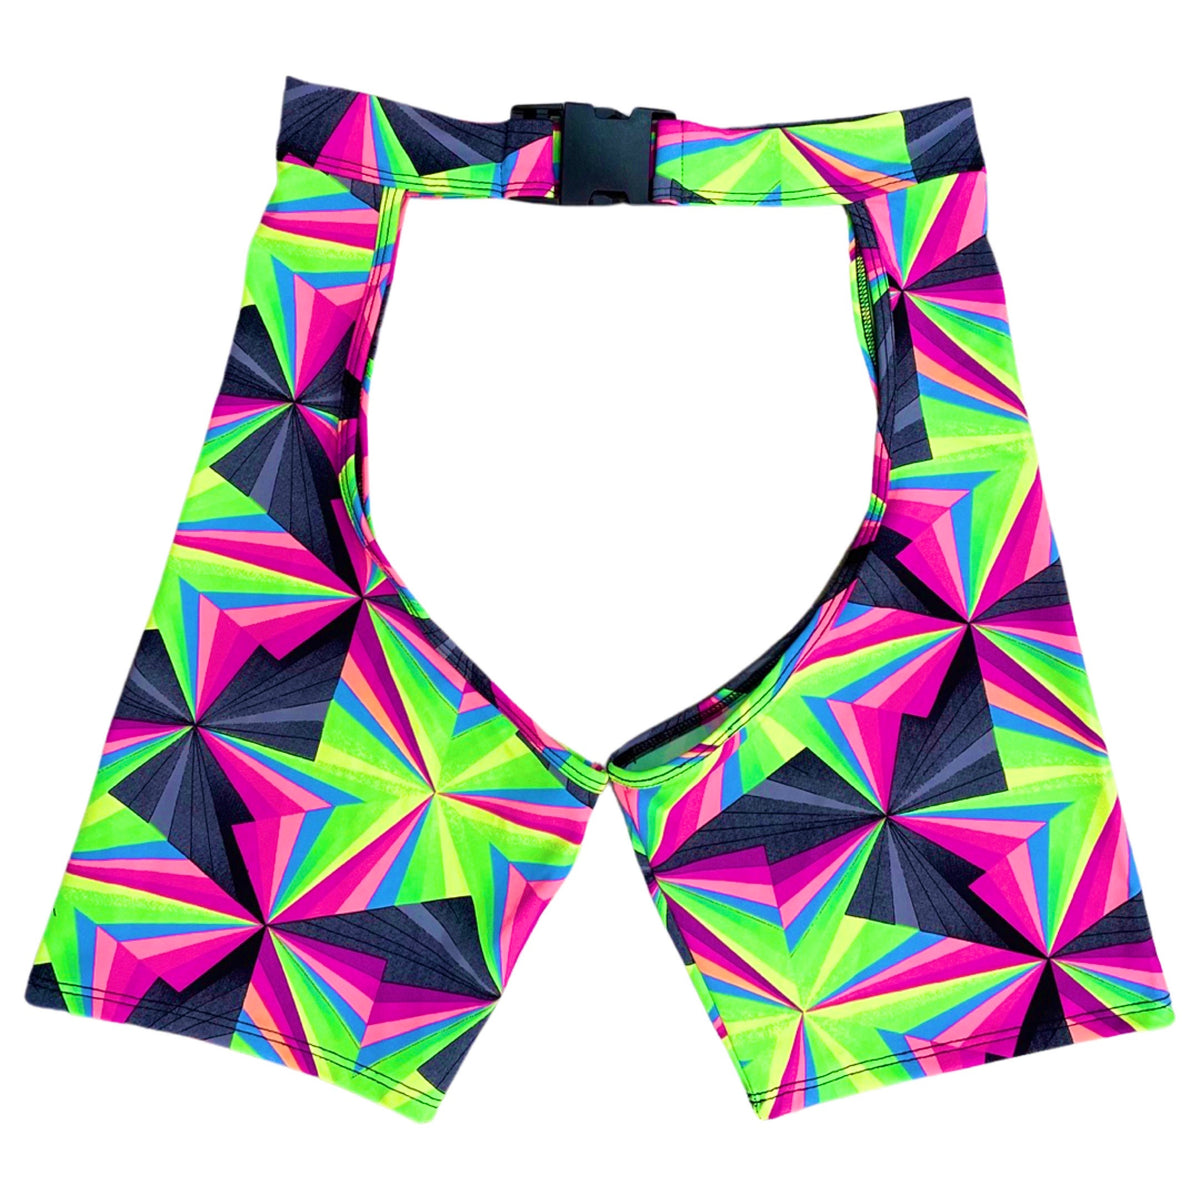 THRILL TRIANGLE ASAP BUCKLED SHORT CHAP